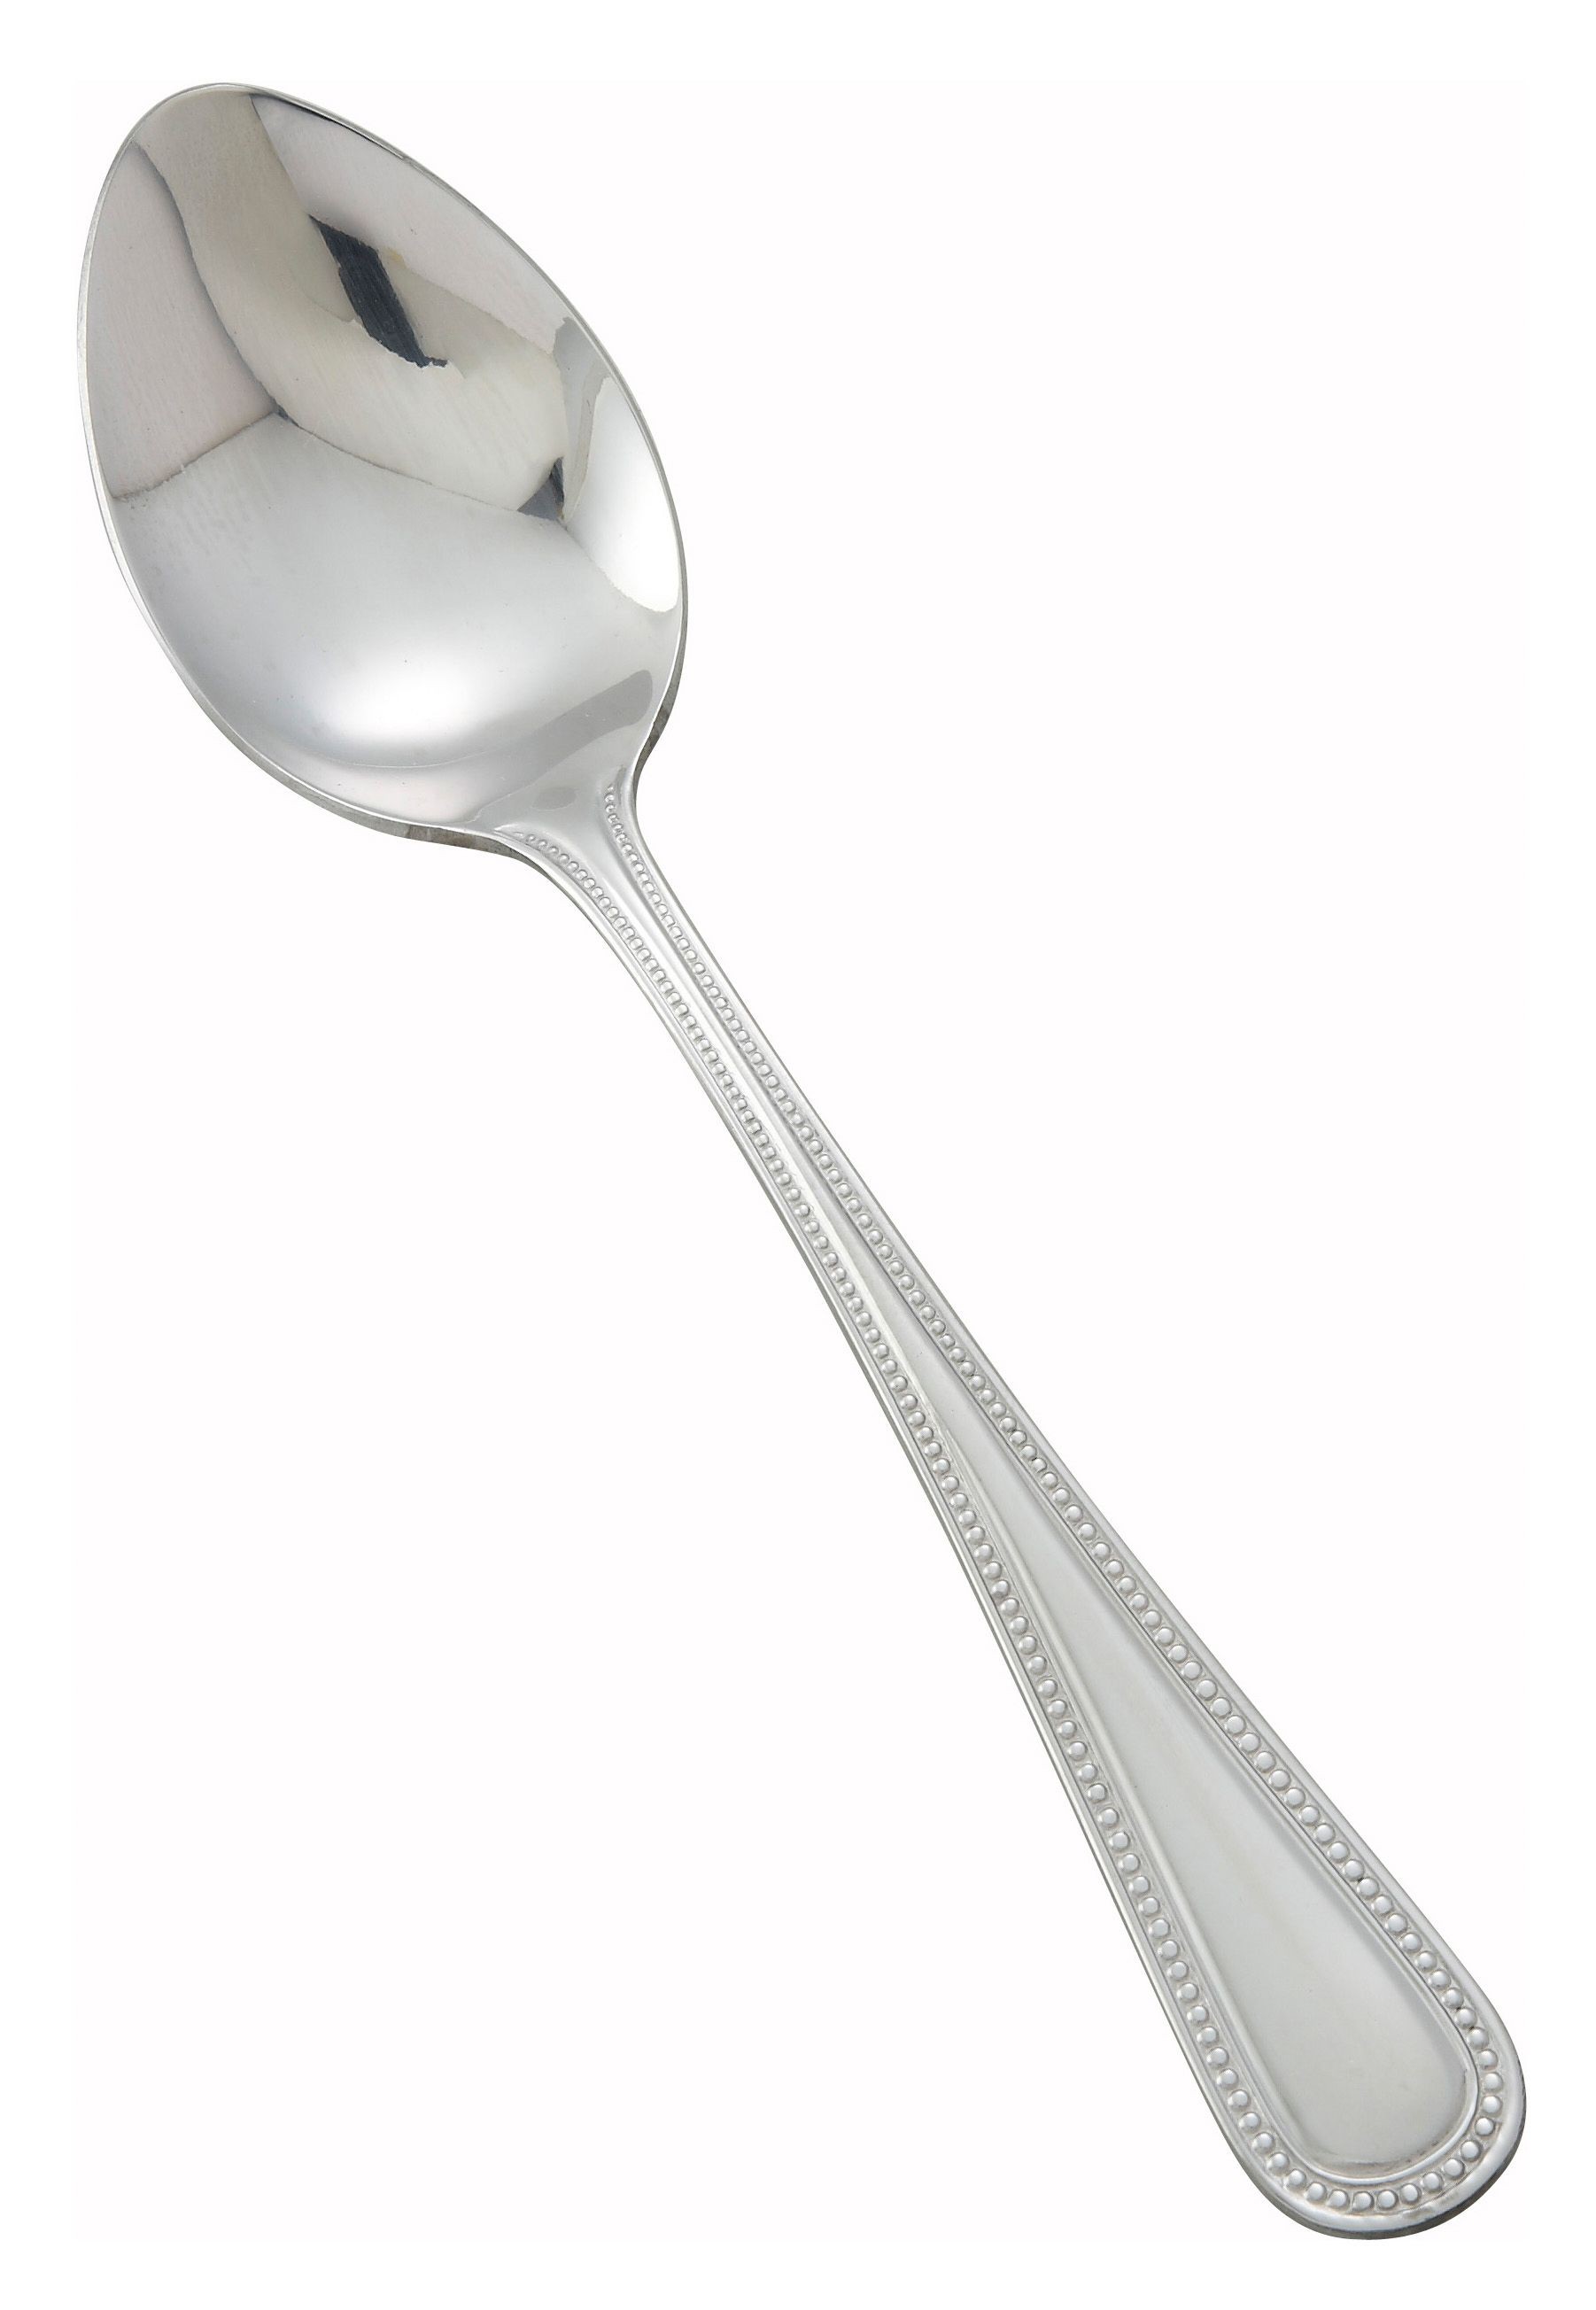 Winco 0005-03 Dots Heavy Weight Mirror Finish Stainless Steel Dinner Spoon (12/Pack)